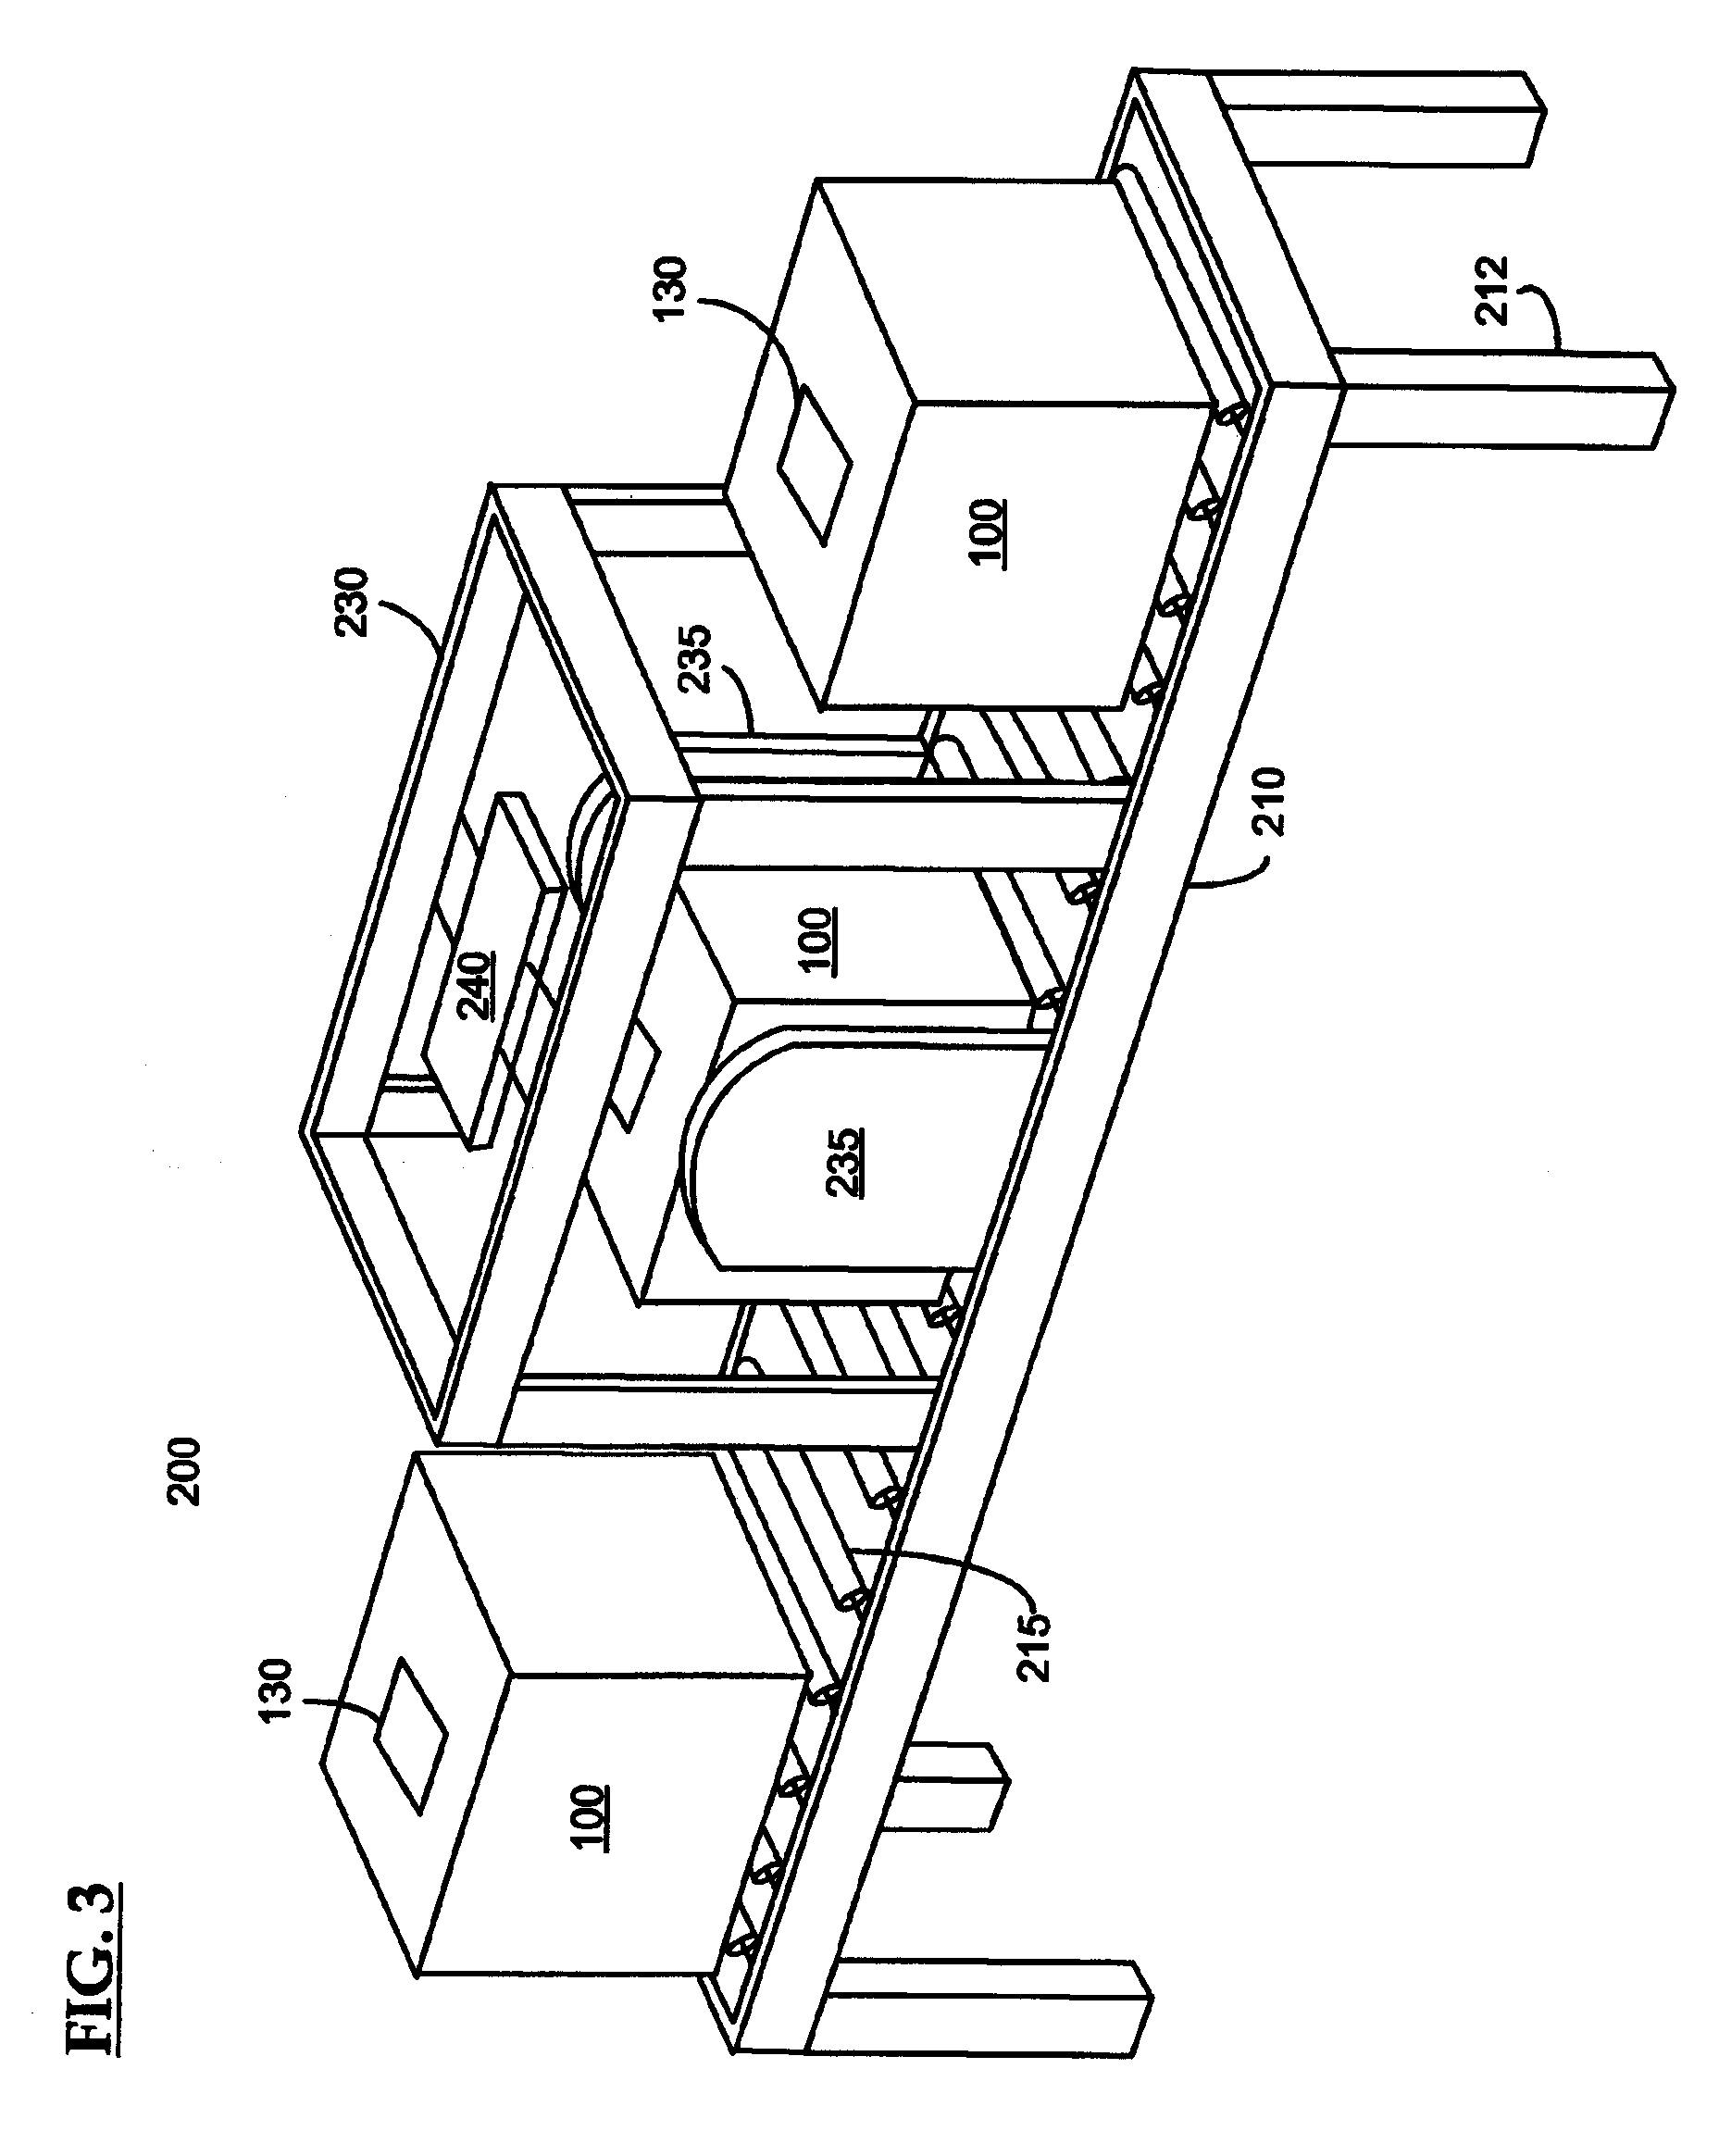 Control system for an rfid-based system for assembling and verifying outbound surgical equipment corresponding to a particular surgery